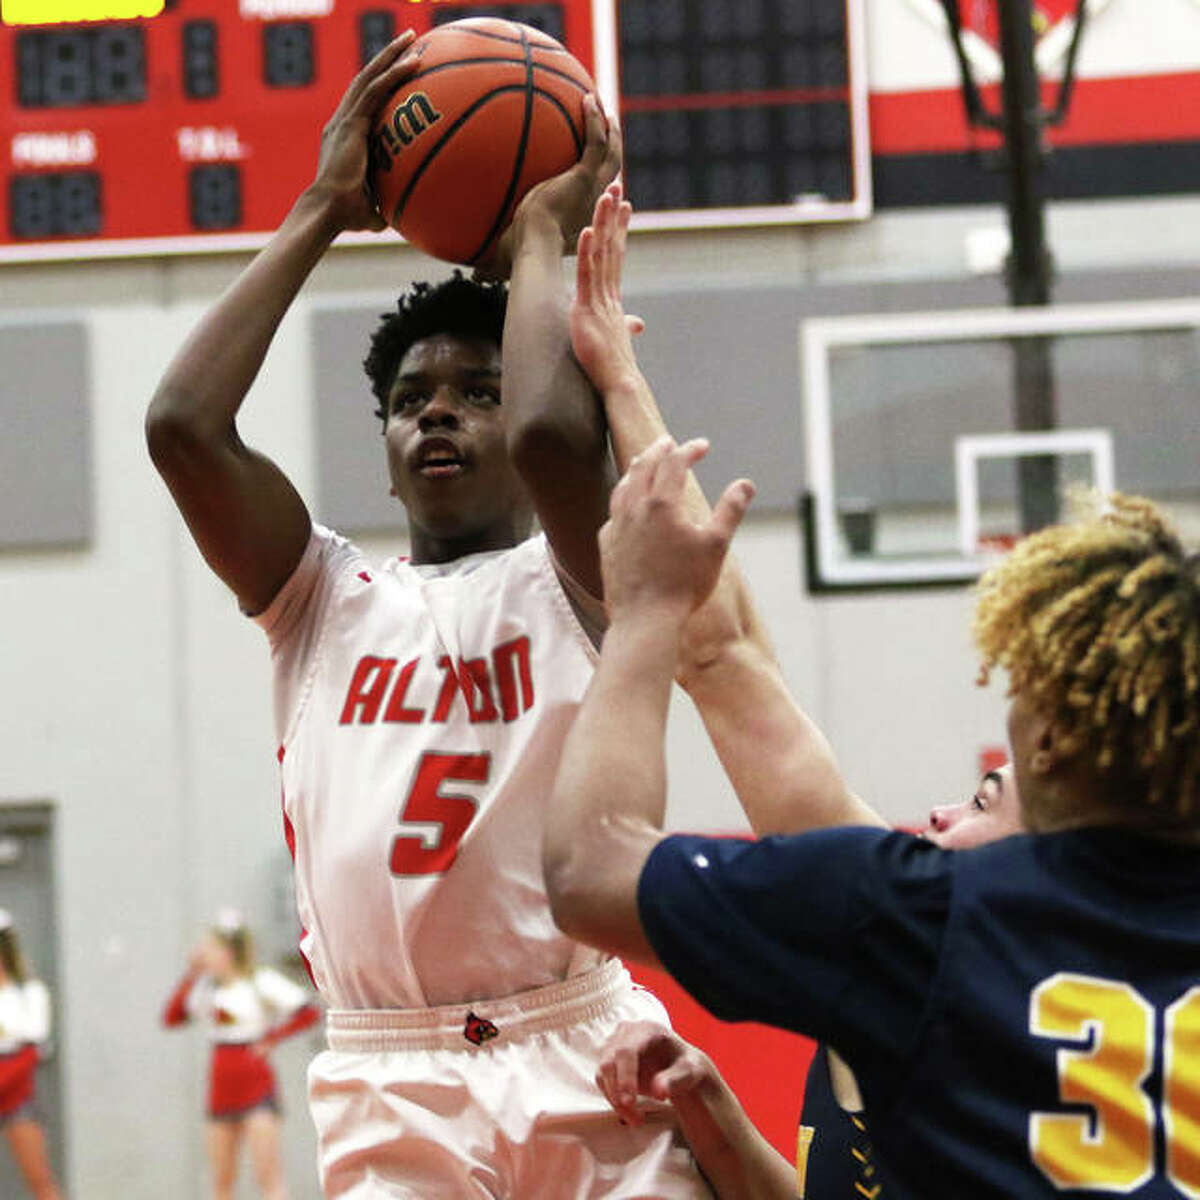 Alton’s Camren Edwards (5) puts up a shot in the lane against the O’Fallon Panthers on Tuesday night in Godfrey.